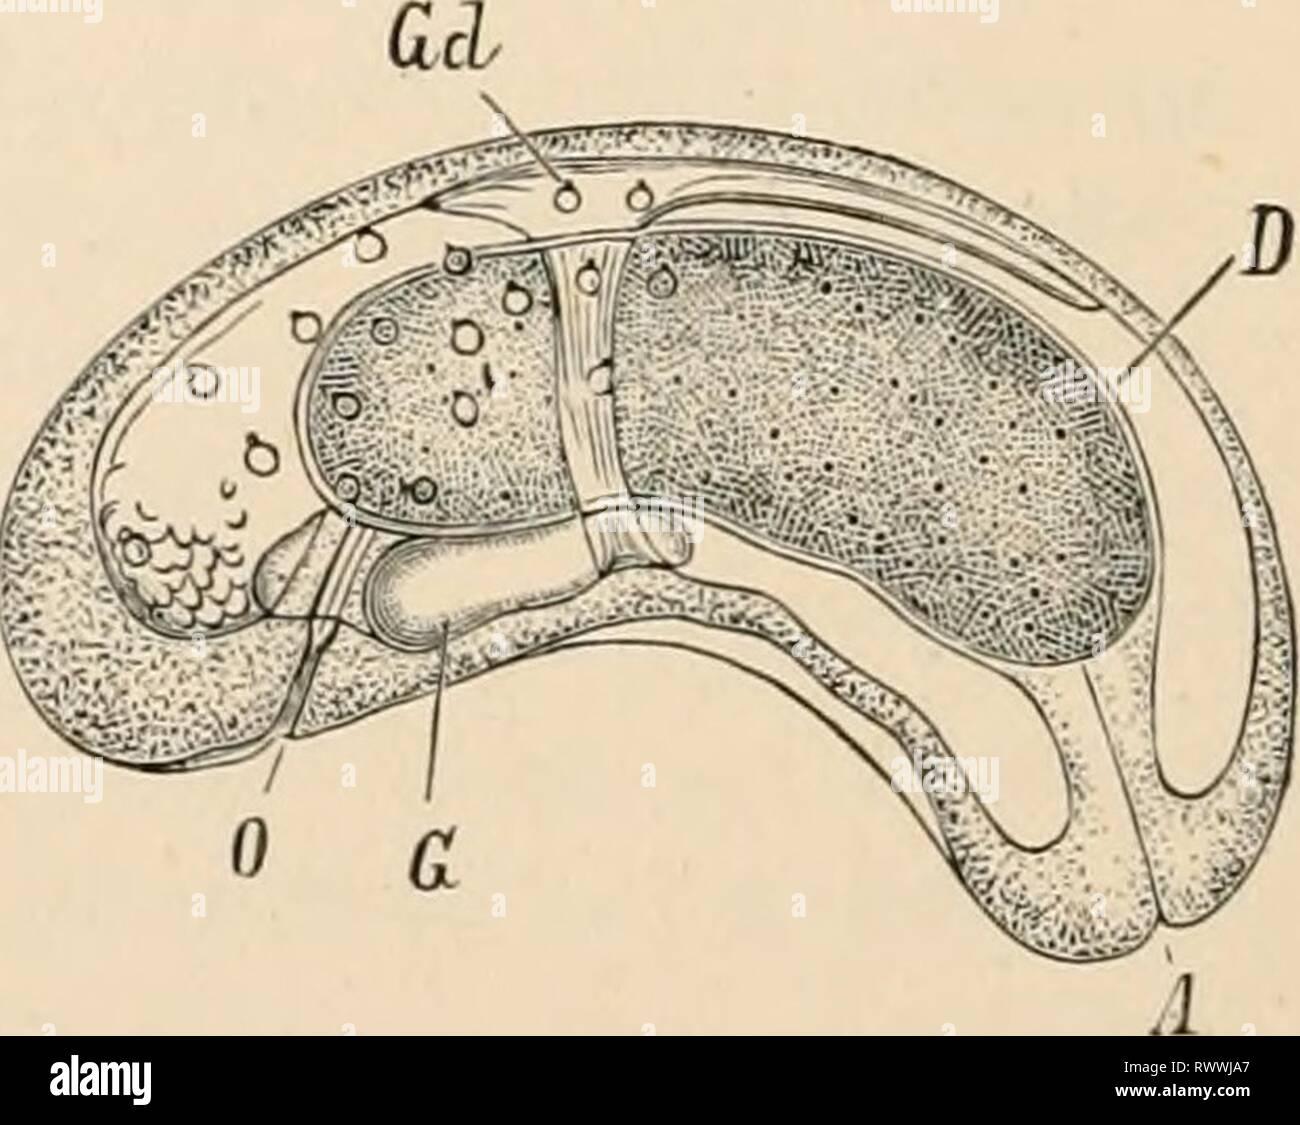 Elementary text-book of zoology (1884) Elementary text-book of zoology elementarytextbo0101clau Year: 1884  d D    FIG. 378.—Young forms of Pciitastomiim tirnioides (after R. Leuckart). n, Egg with embryo. b, Embryo with two pairs of hooked feet, Hf and Hf'. c, Larva from liver of rabbit. G, Ganglion ; D, intestine ; lid, skin glands, d, Older larva, O, mouth ; A, anus ; Gd, genital glands. Stock Photo